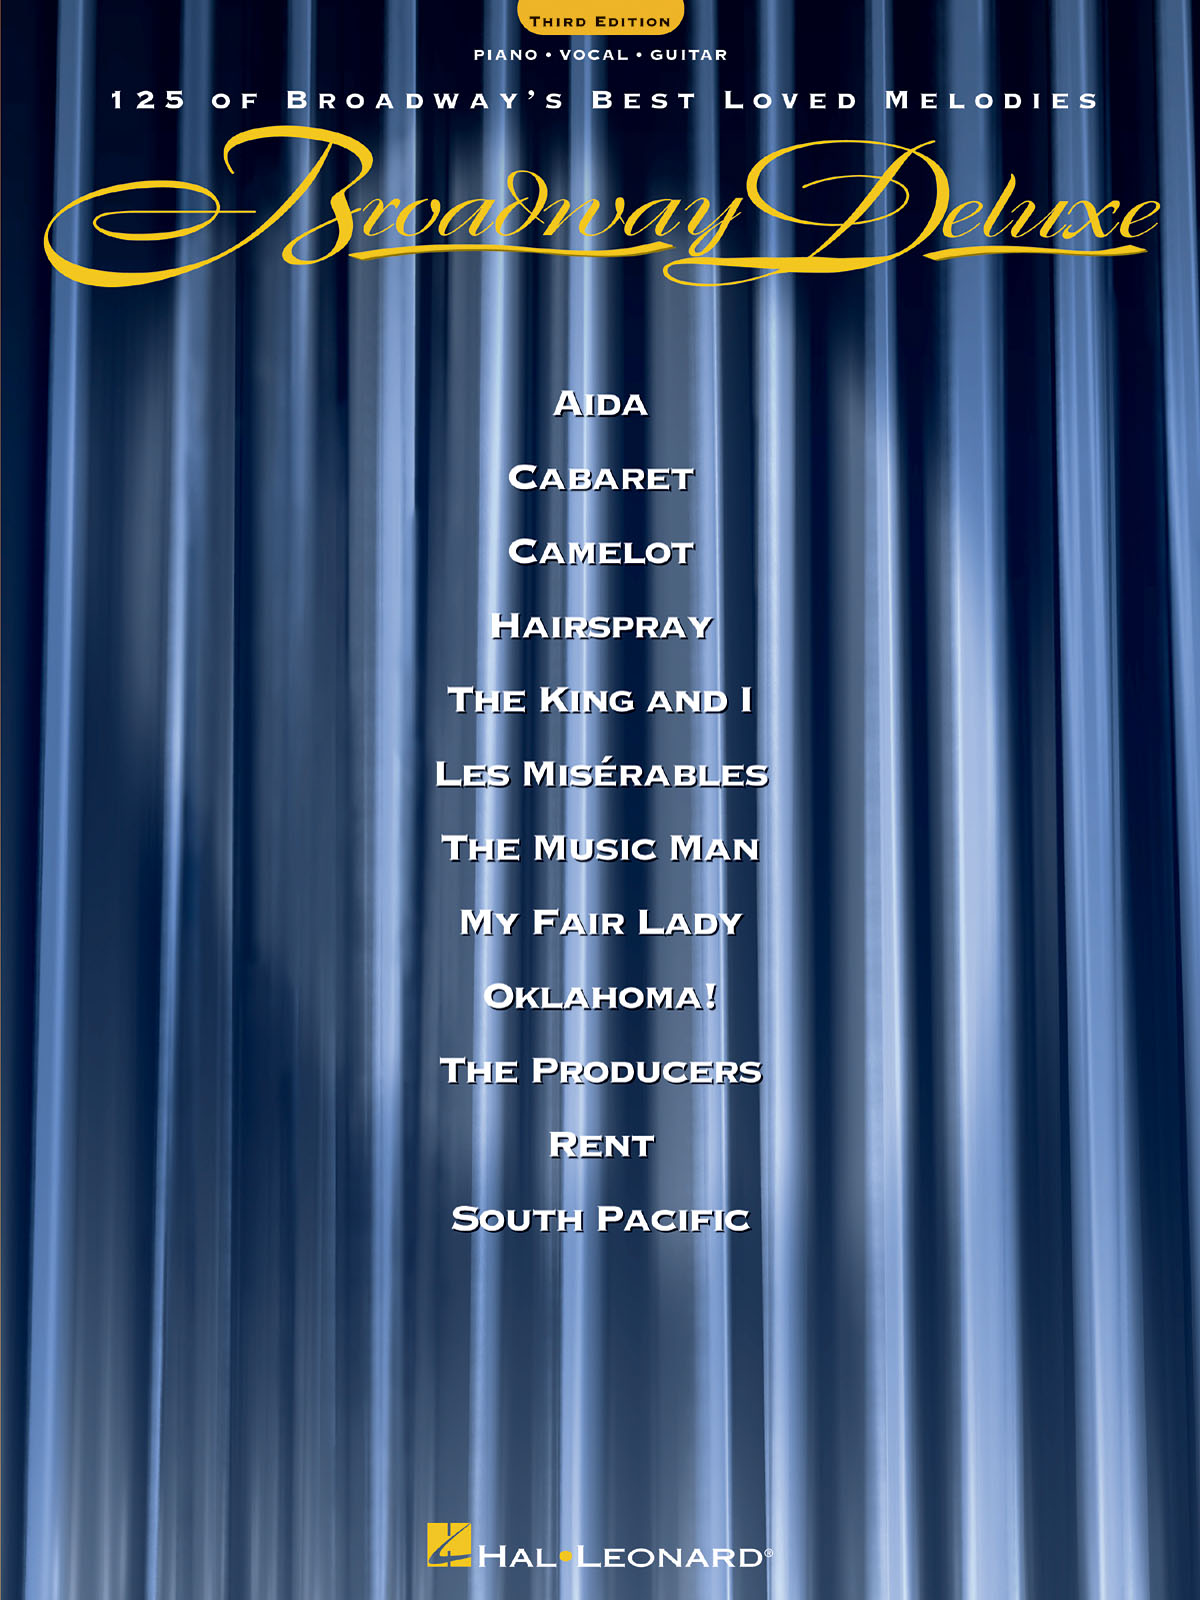 Broadway Deluxe - Third Edition(125 of Broadway's Best Loved Melodies)